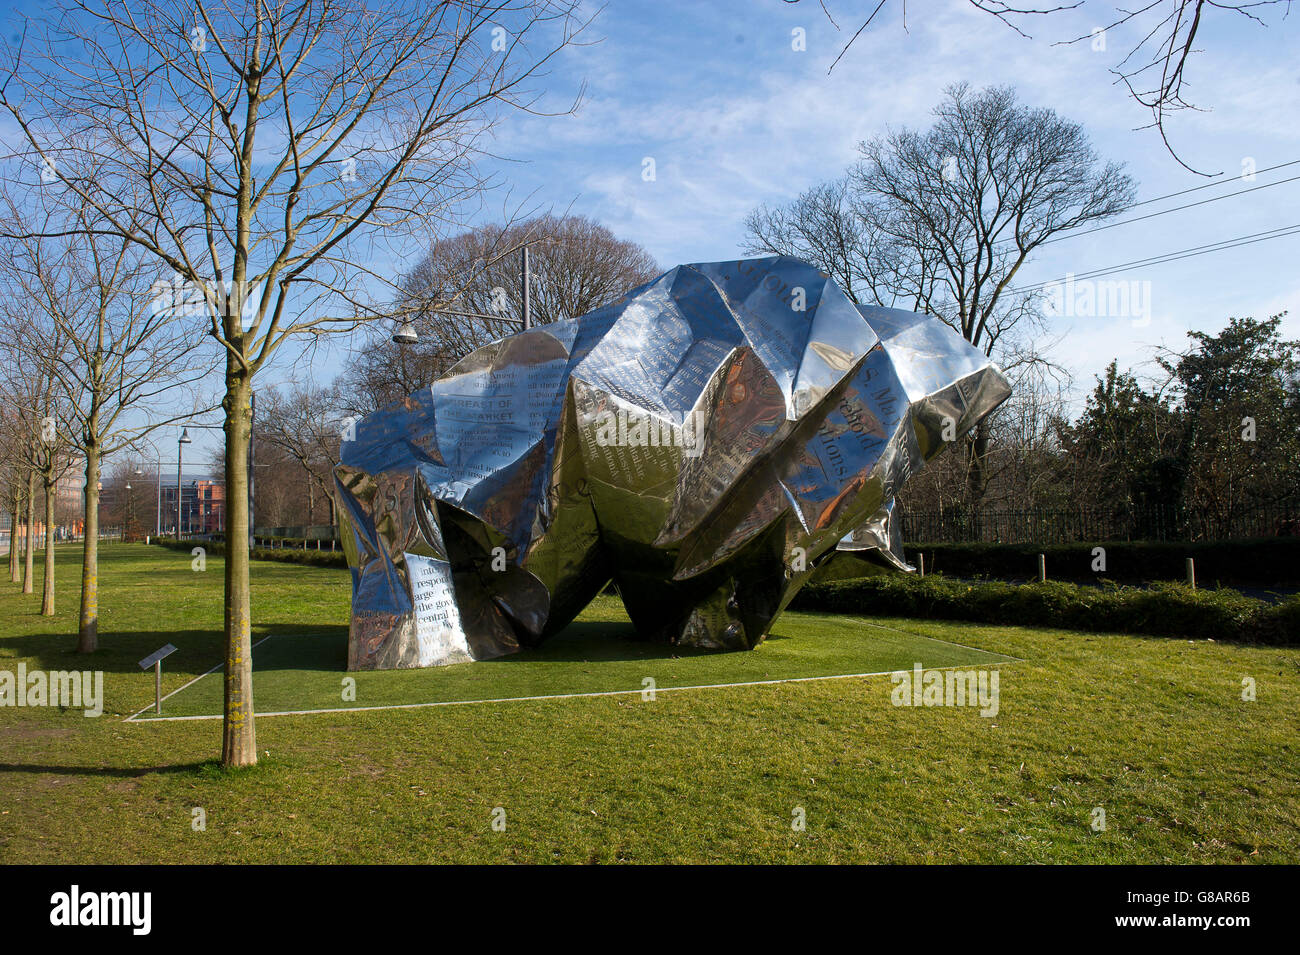 France - Lyon, a city crossed by two rivers Saone and Rhone region of Auvergne-Rhône-Alpes. Sculpture of Wang Du 'world Marckets, 2004' in front of the art museum Stock Photo